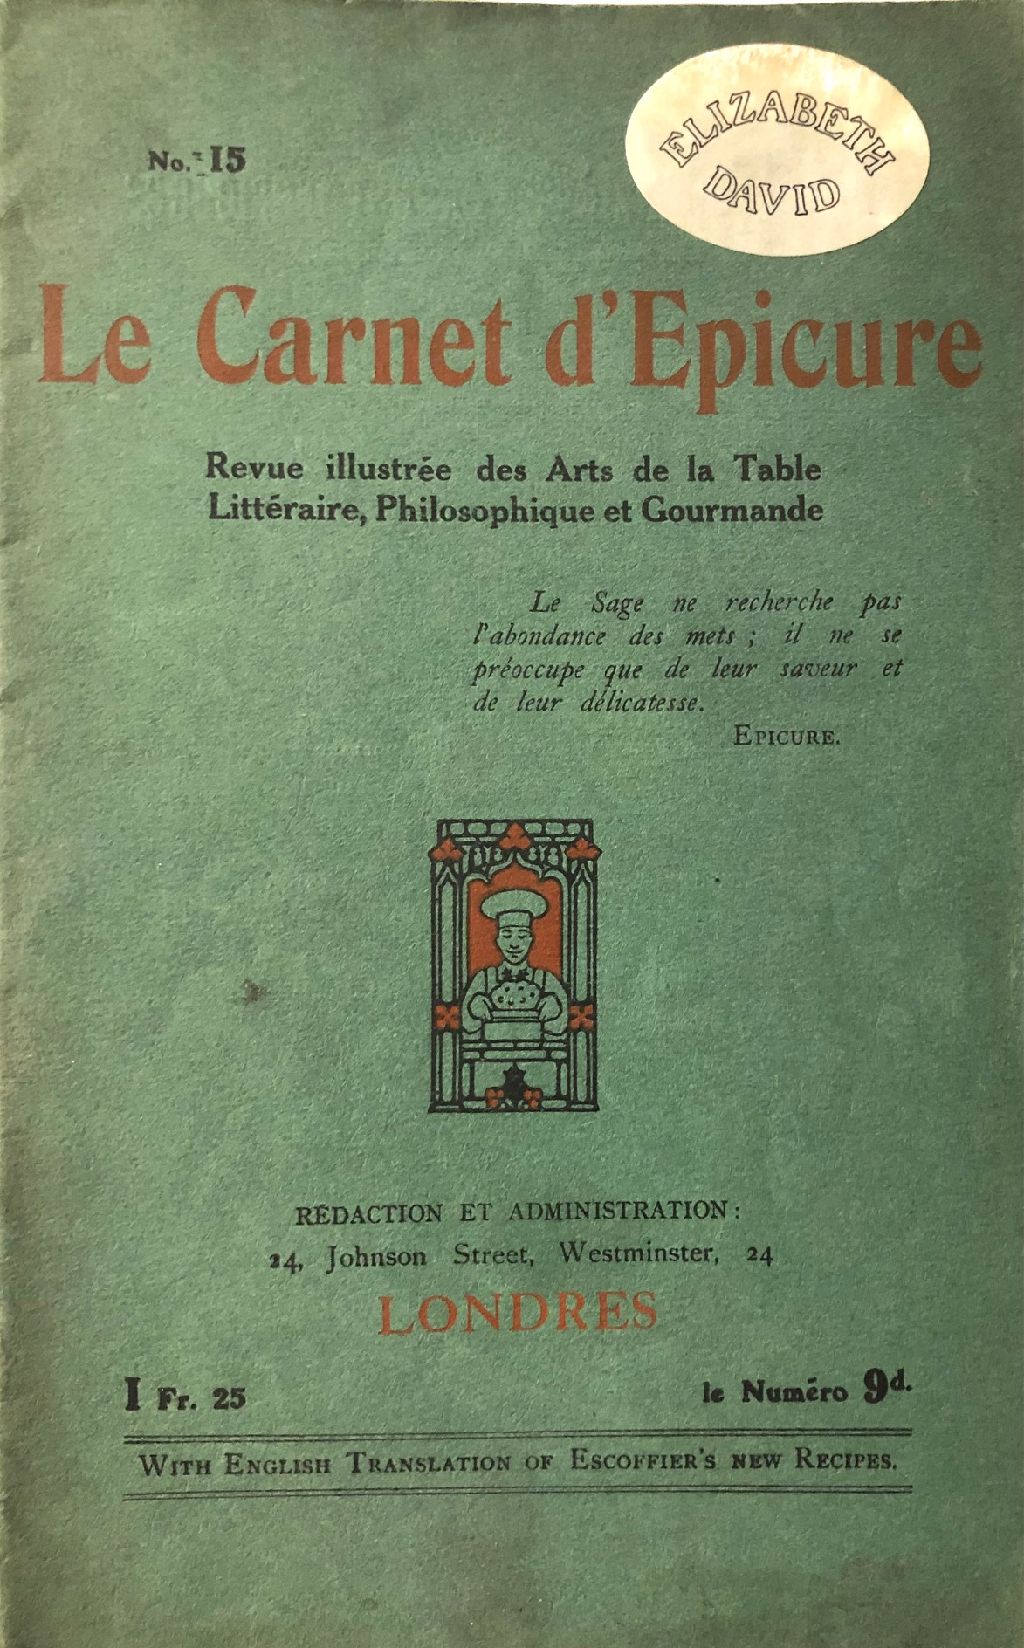 (*NEW ARRIVAL*) Elizabeth David. 8 issues of Le Carnet d'Epicure with her bookplate to front covers.